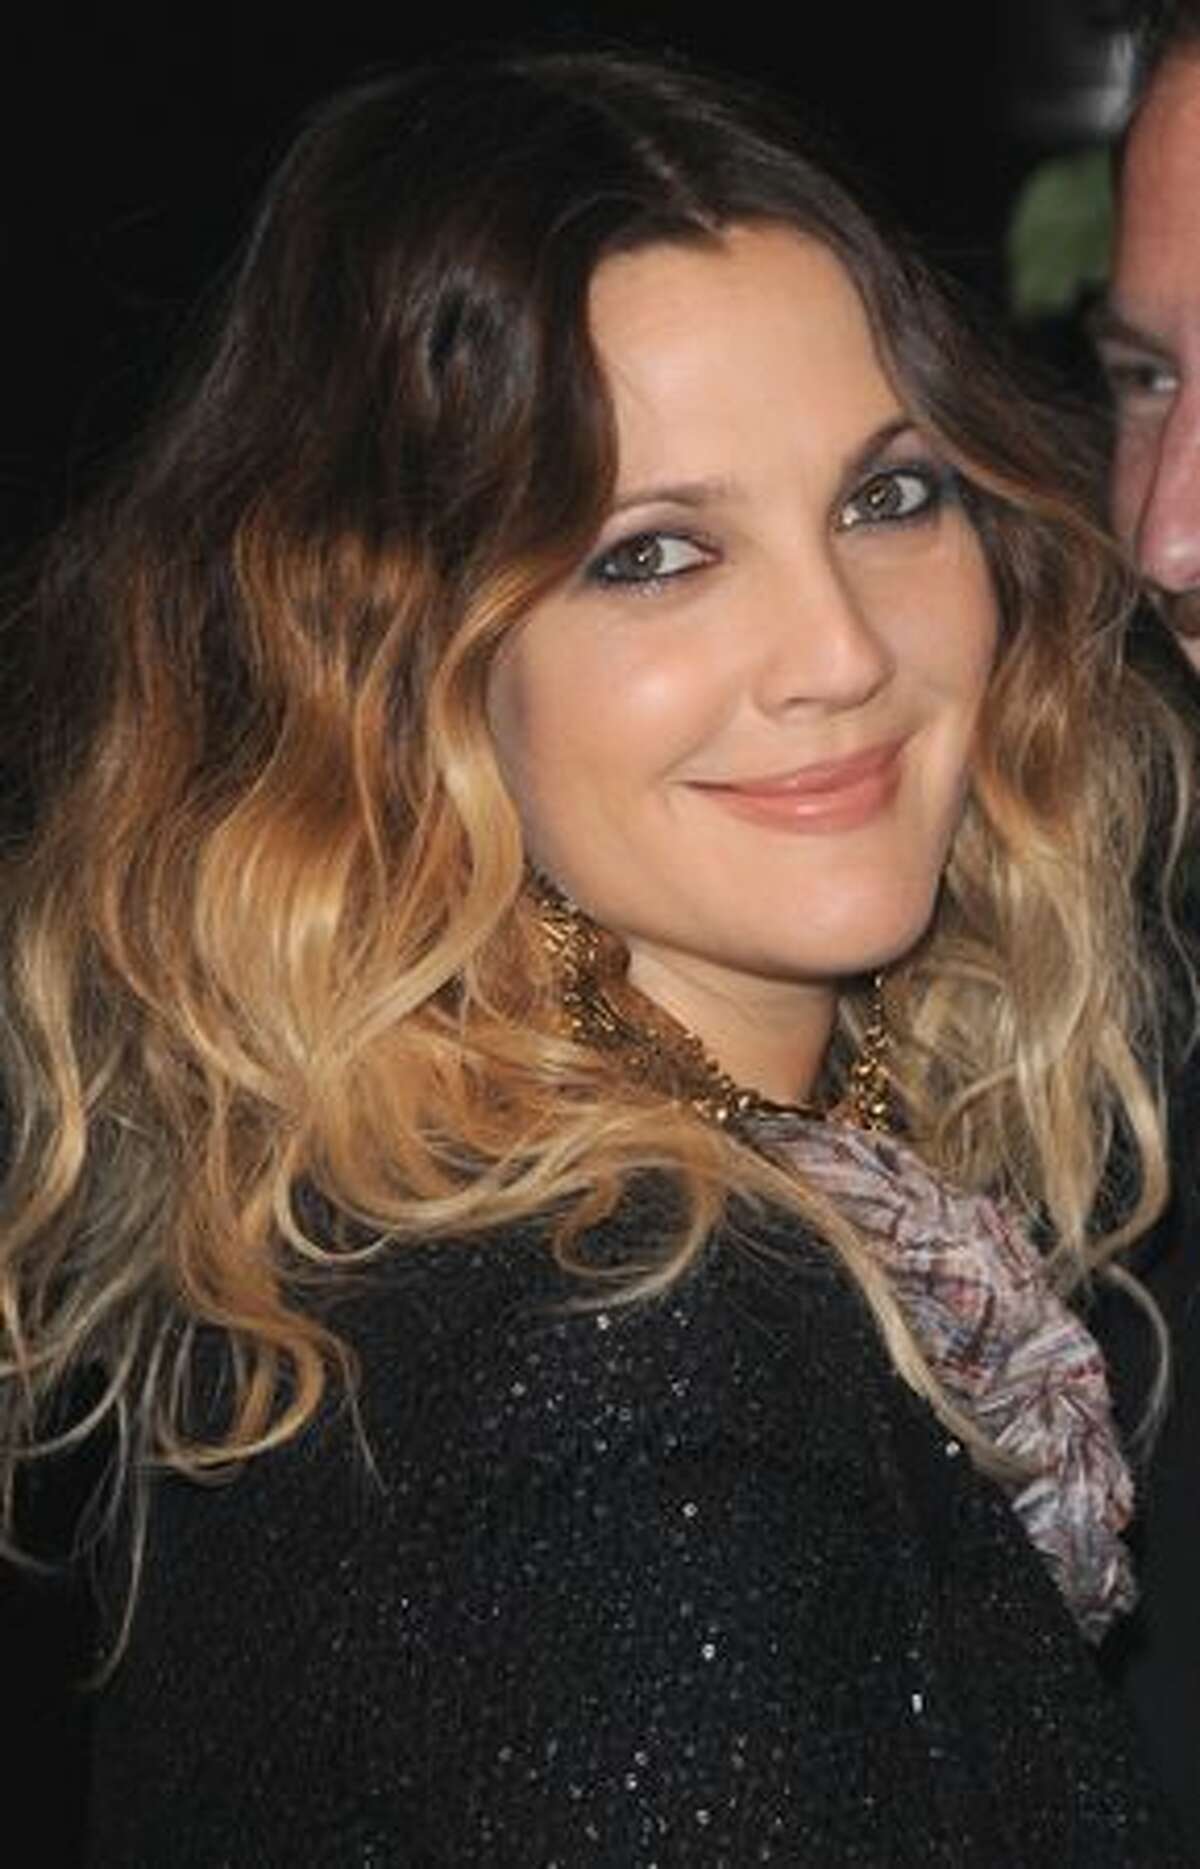 Actress Drew Barrymore arrives at the Chanel & Charles Finch Pre-Oscar Dinner Celebrating Fashion & Film at Madeo Restaurant in Los Angeles, California.